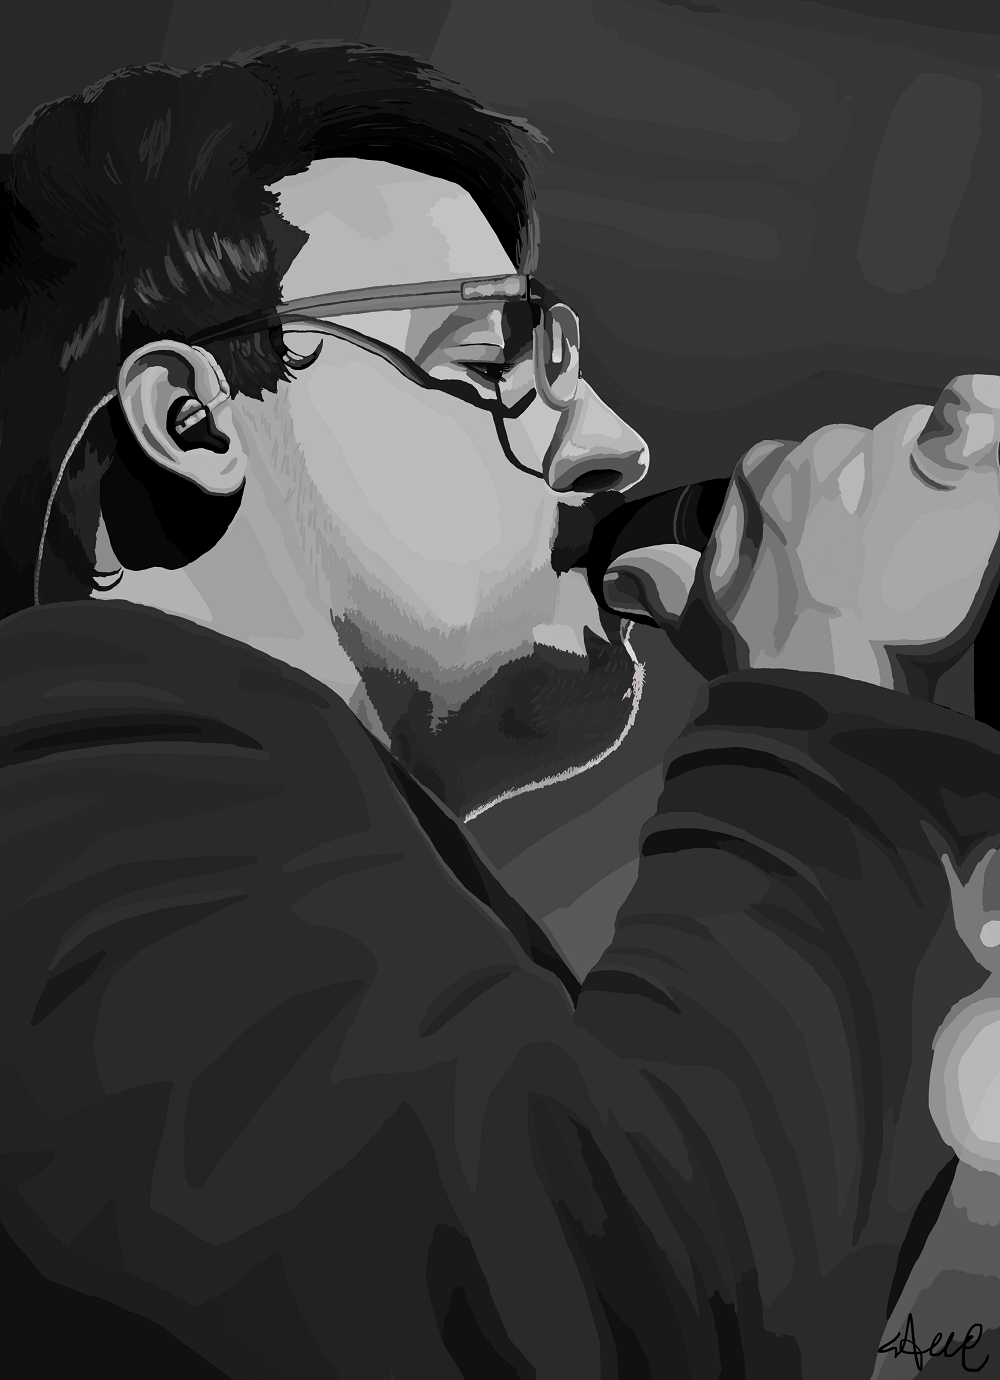 A black and white drawing of John Flansburgh's profile. He is singing into a microphone.